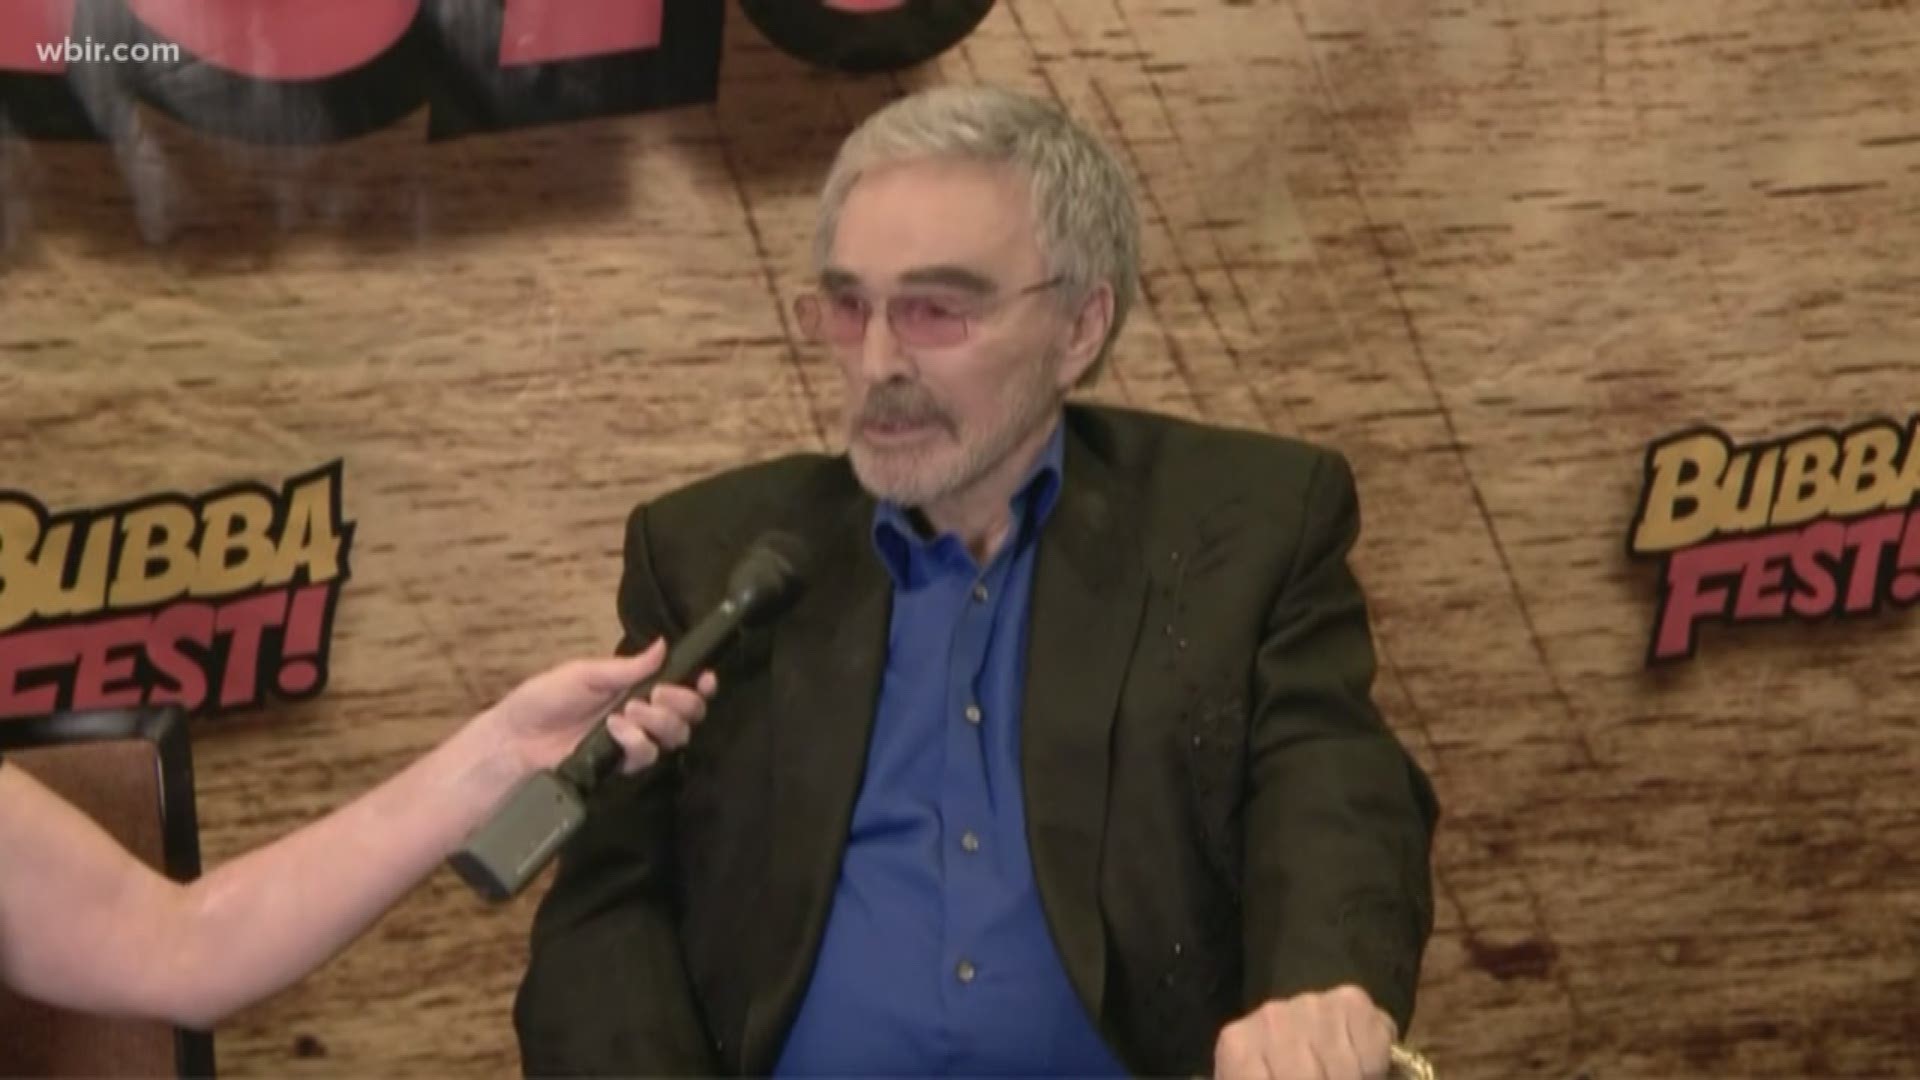 Emily Stroud talks with the legendary Burt Reynolds who is one of many celebrities taking part in Bubba Fest this weekend in Pigeon Forge. For more information visit bubbafest.com
Aug. 10, 2018-4pm